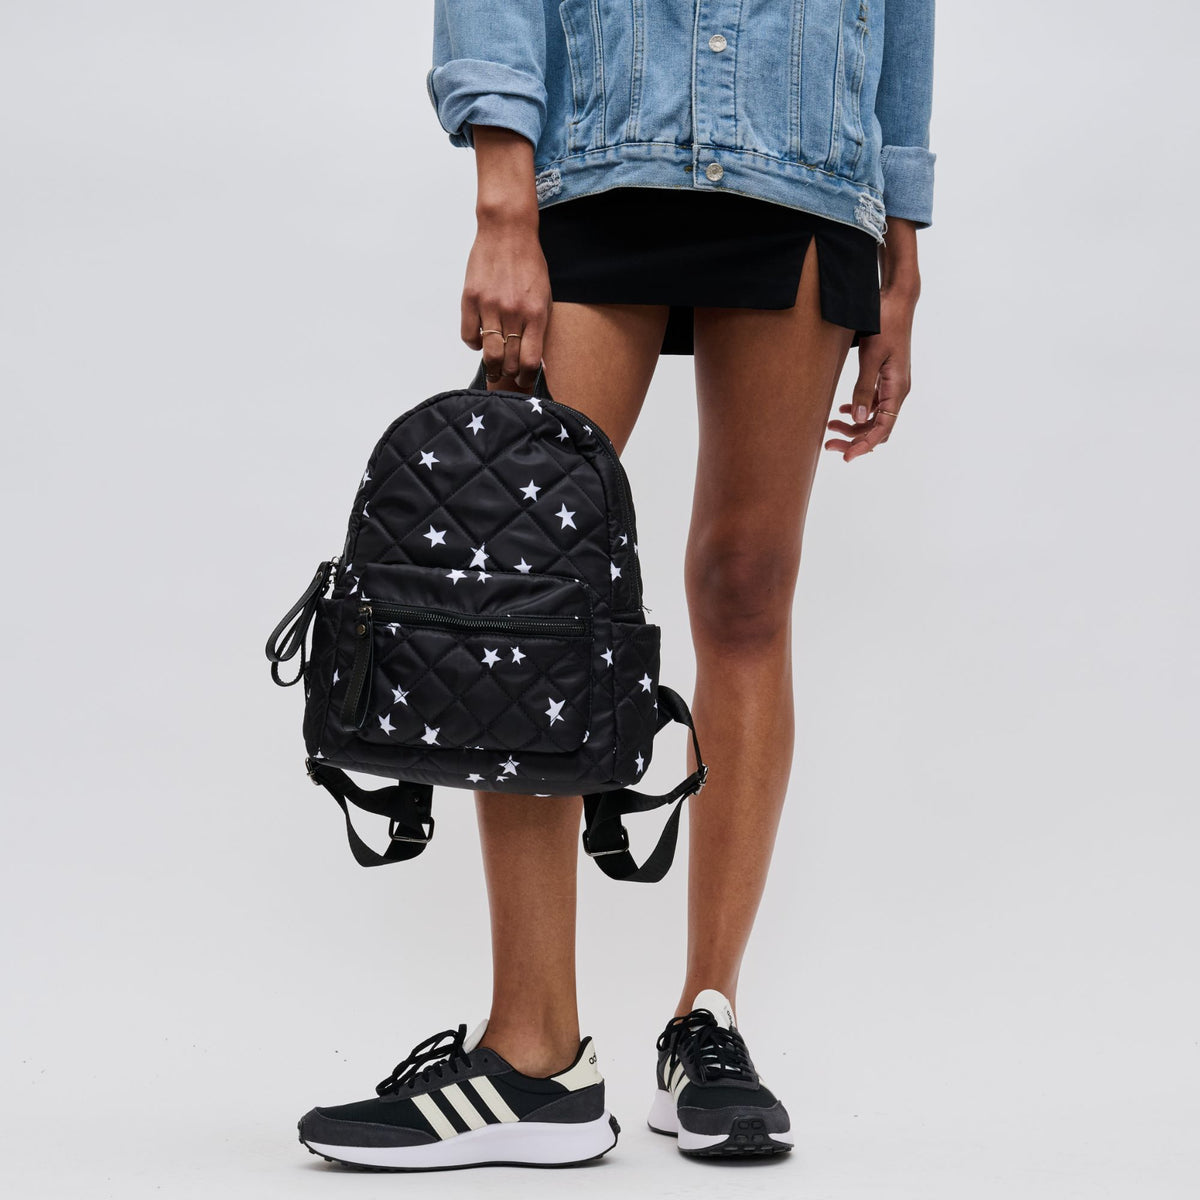 Woman wearing Black Star Sol and Selene Motivator - Small Backpack 841764106597 View 3 | Black Star